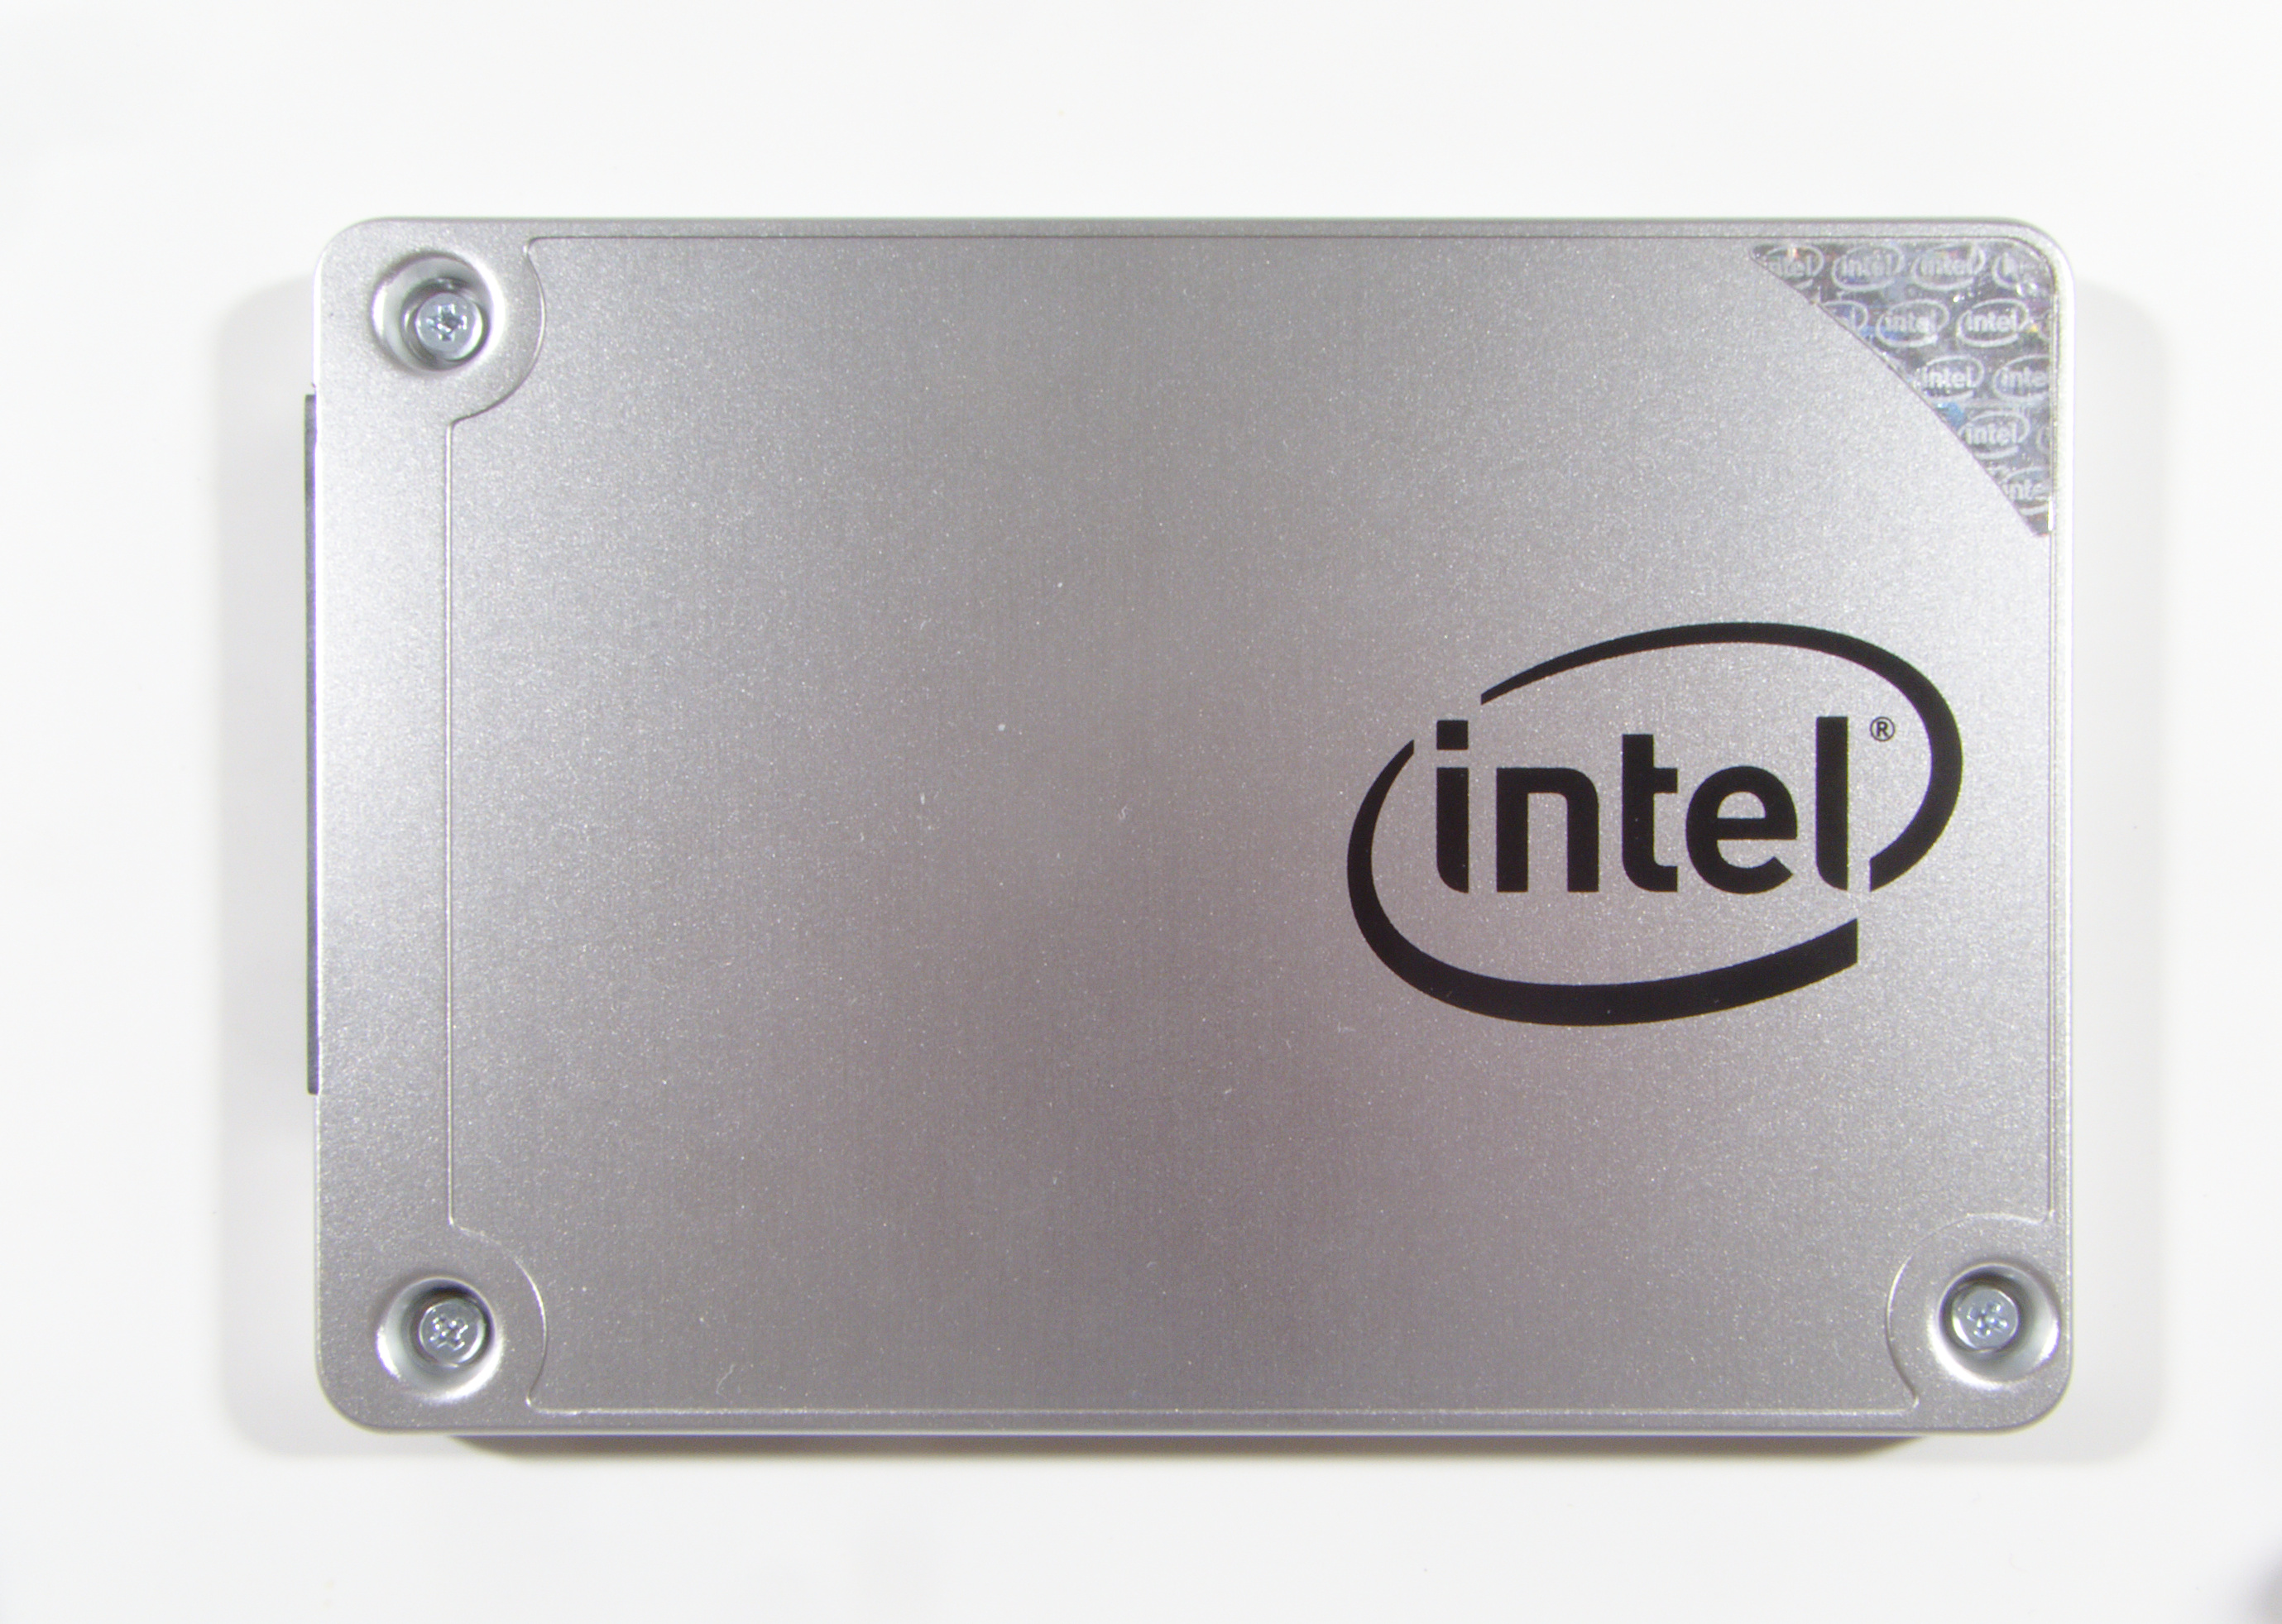 Reviewer Milestone Splendor Final Words - The Intel SSD 540s (480GB) Review